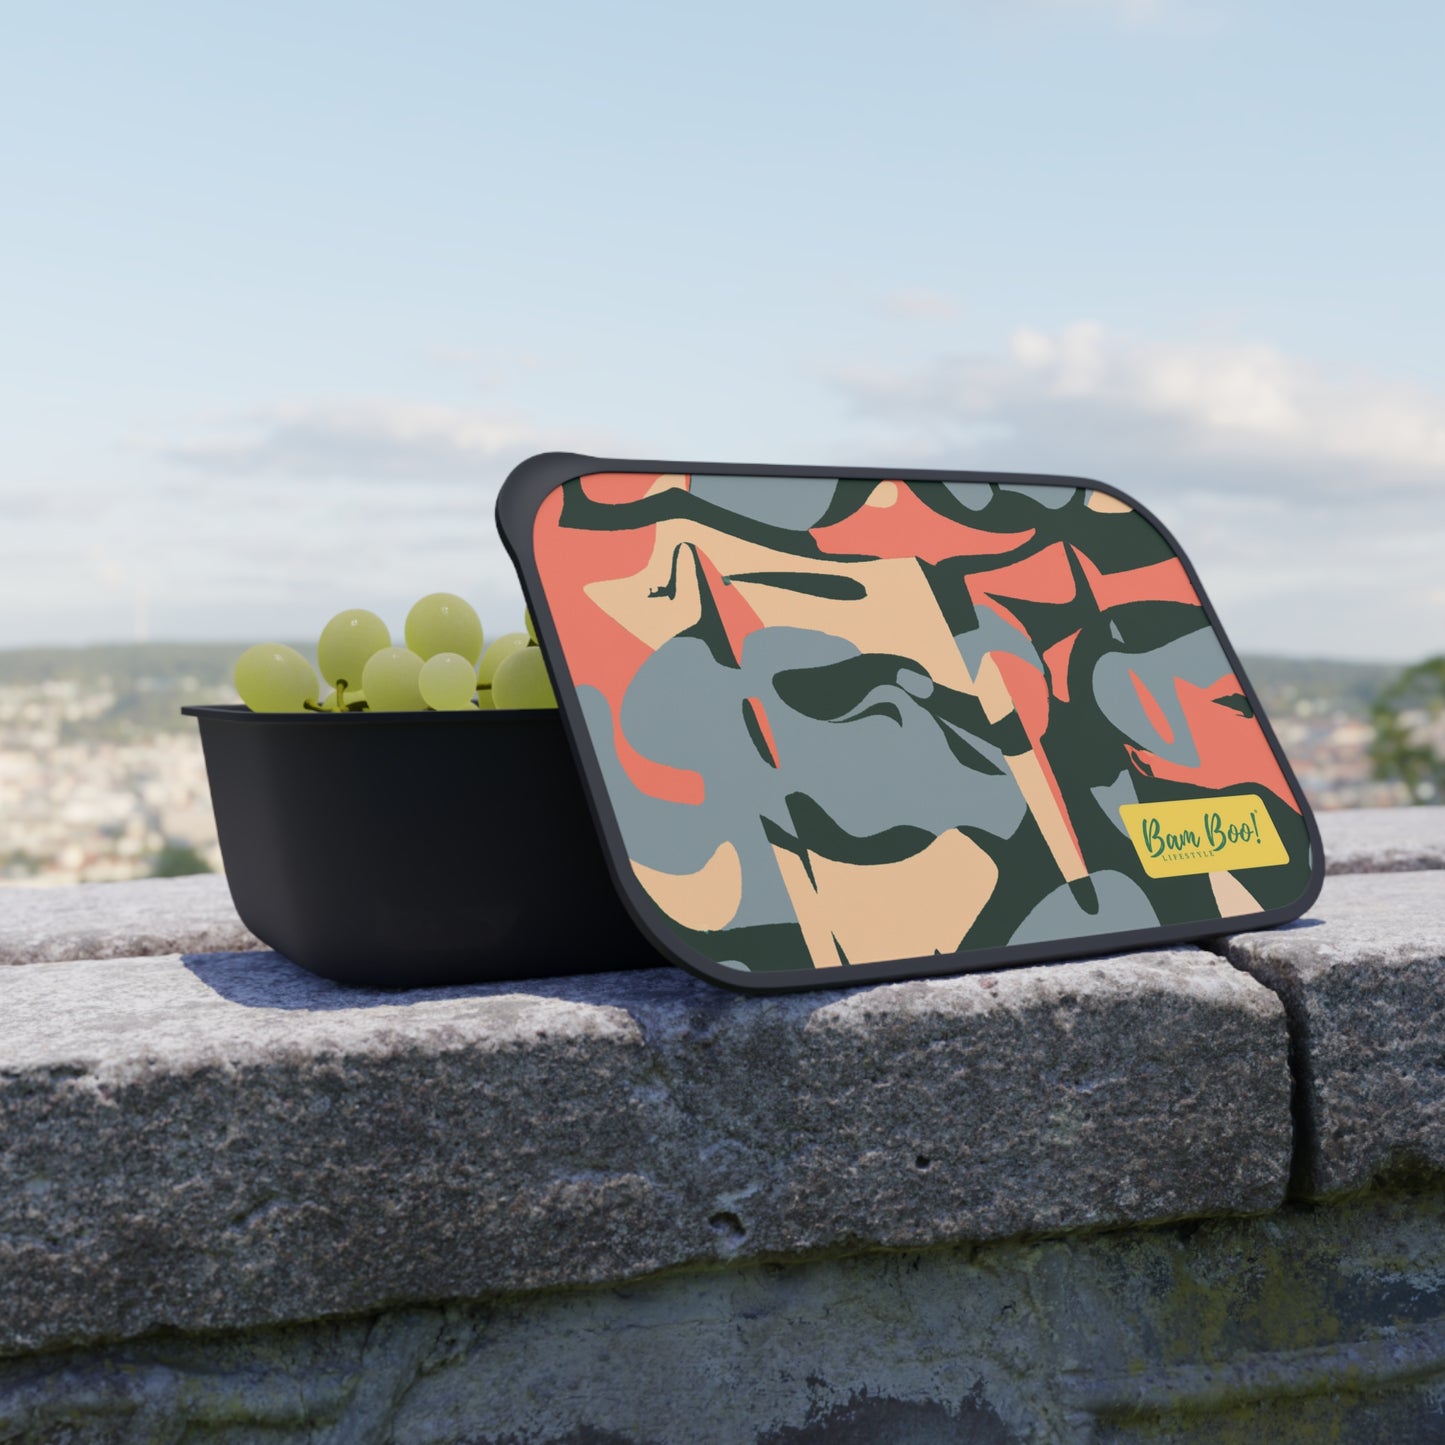 "A Rainbow Symphony of Shapes" - Bam Boo! Lifestyle Eco-friendly PLA Bento Box with Band and Utensils